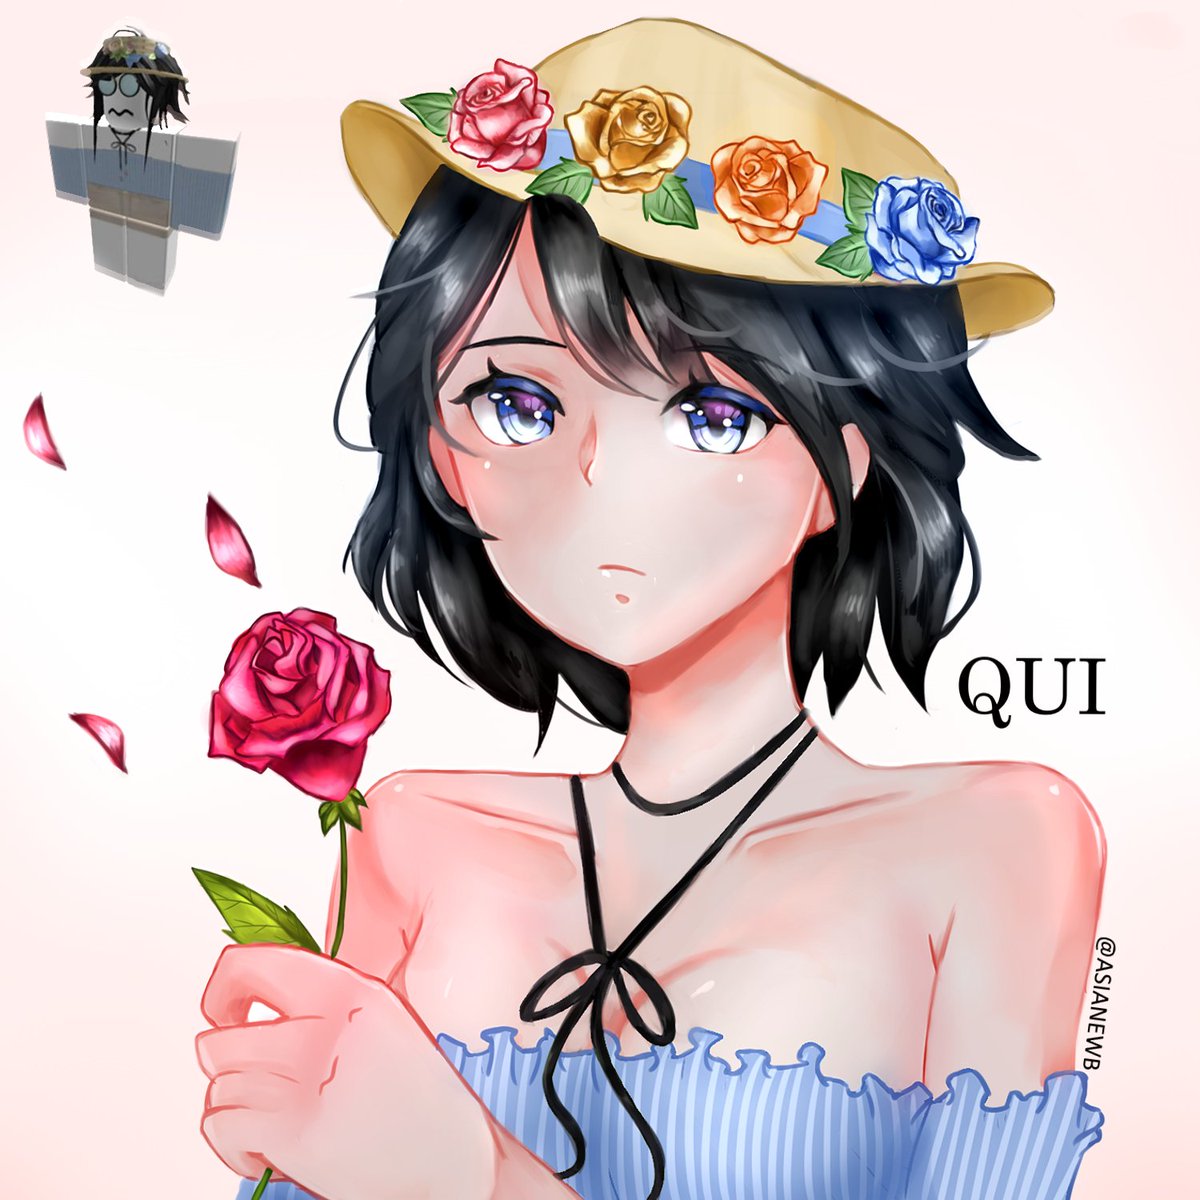 M1kl On Twitter Qulllannartcontest Roblox Robloxart Wow O O It Has Been Already A Month Since I Havent Uploaded Drawings Well Heres My Entry For Qui S Art Contest Qulllann Https T Co 7ixaxry01m - roblox girl wow